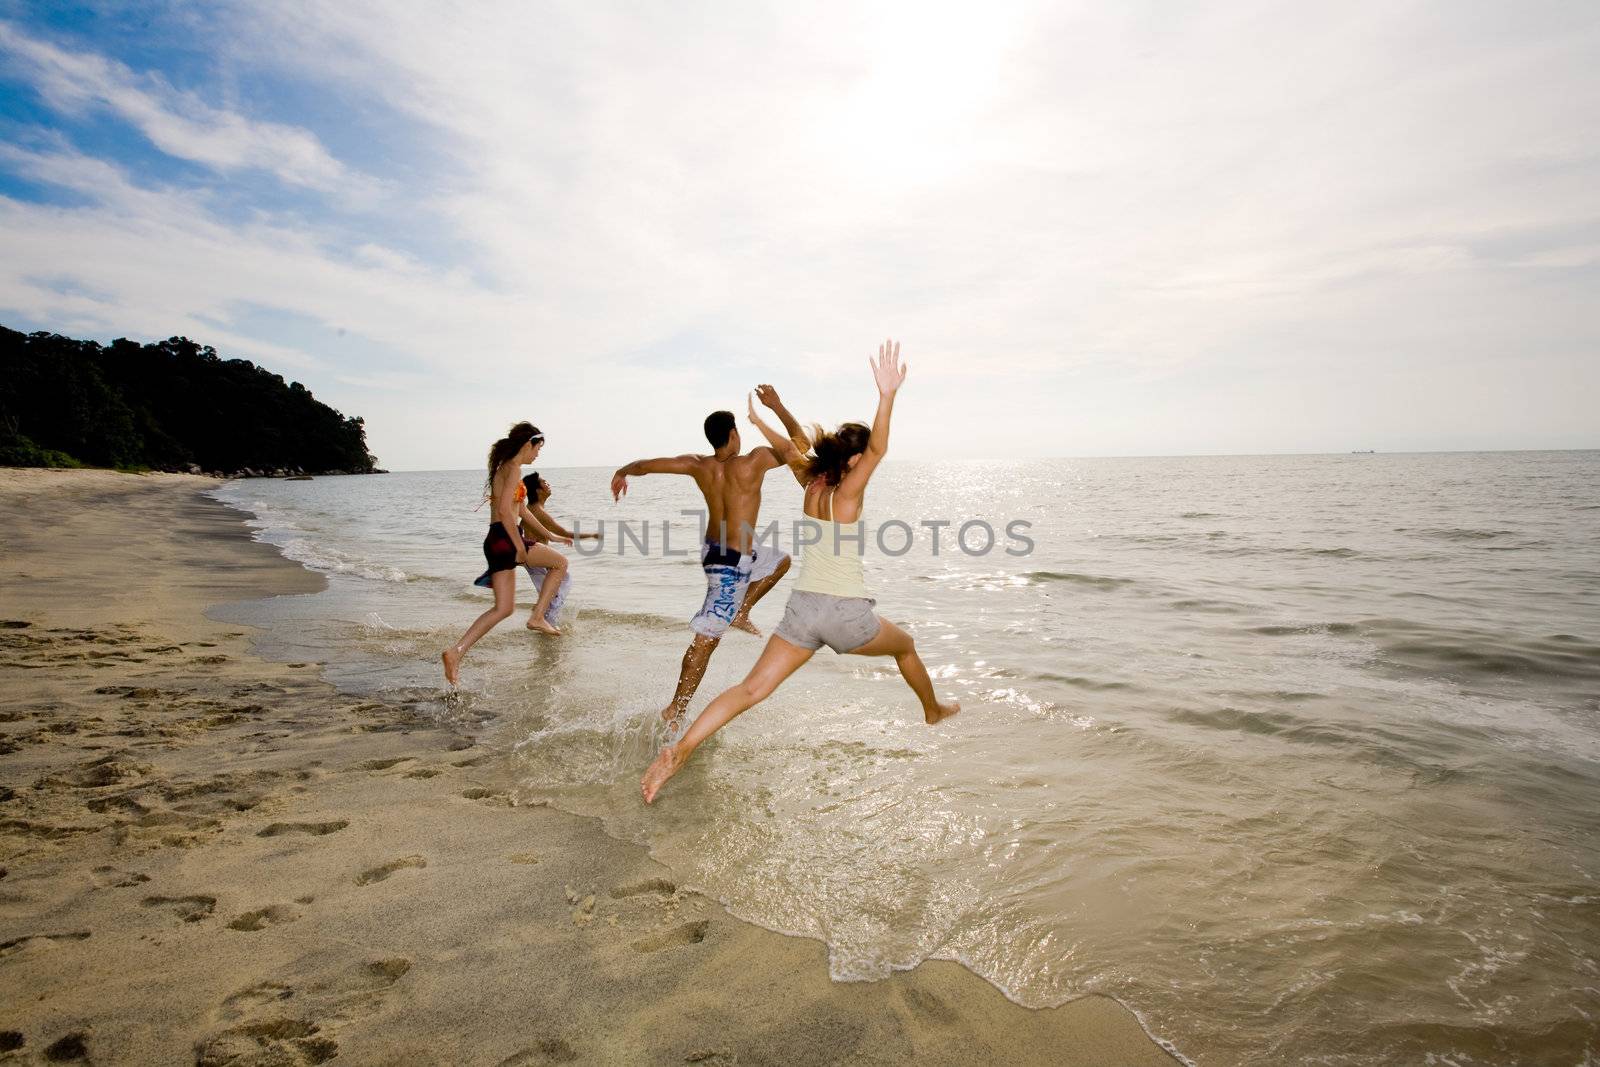 sunset beach with a group of friends having fun jumping